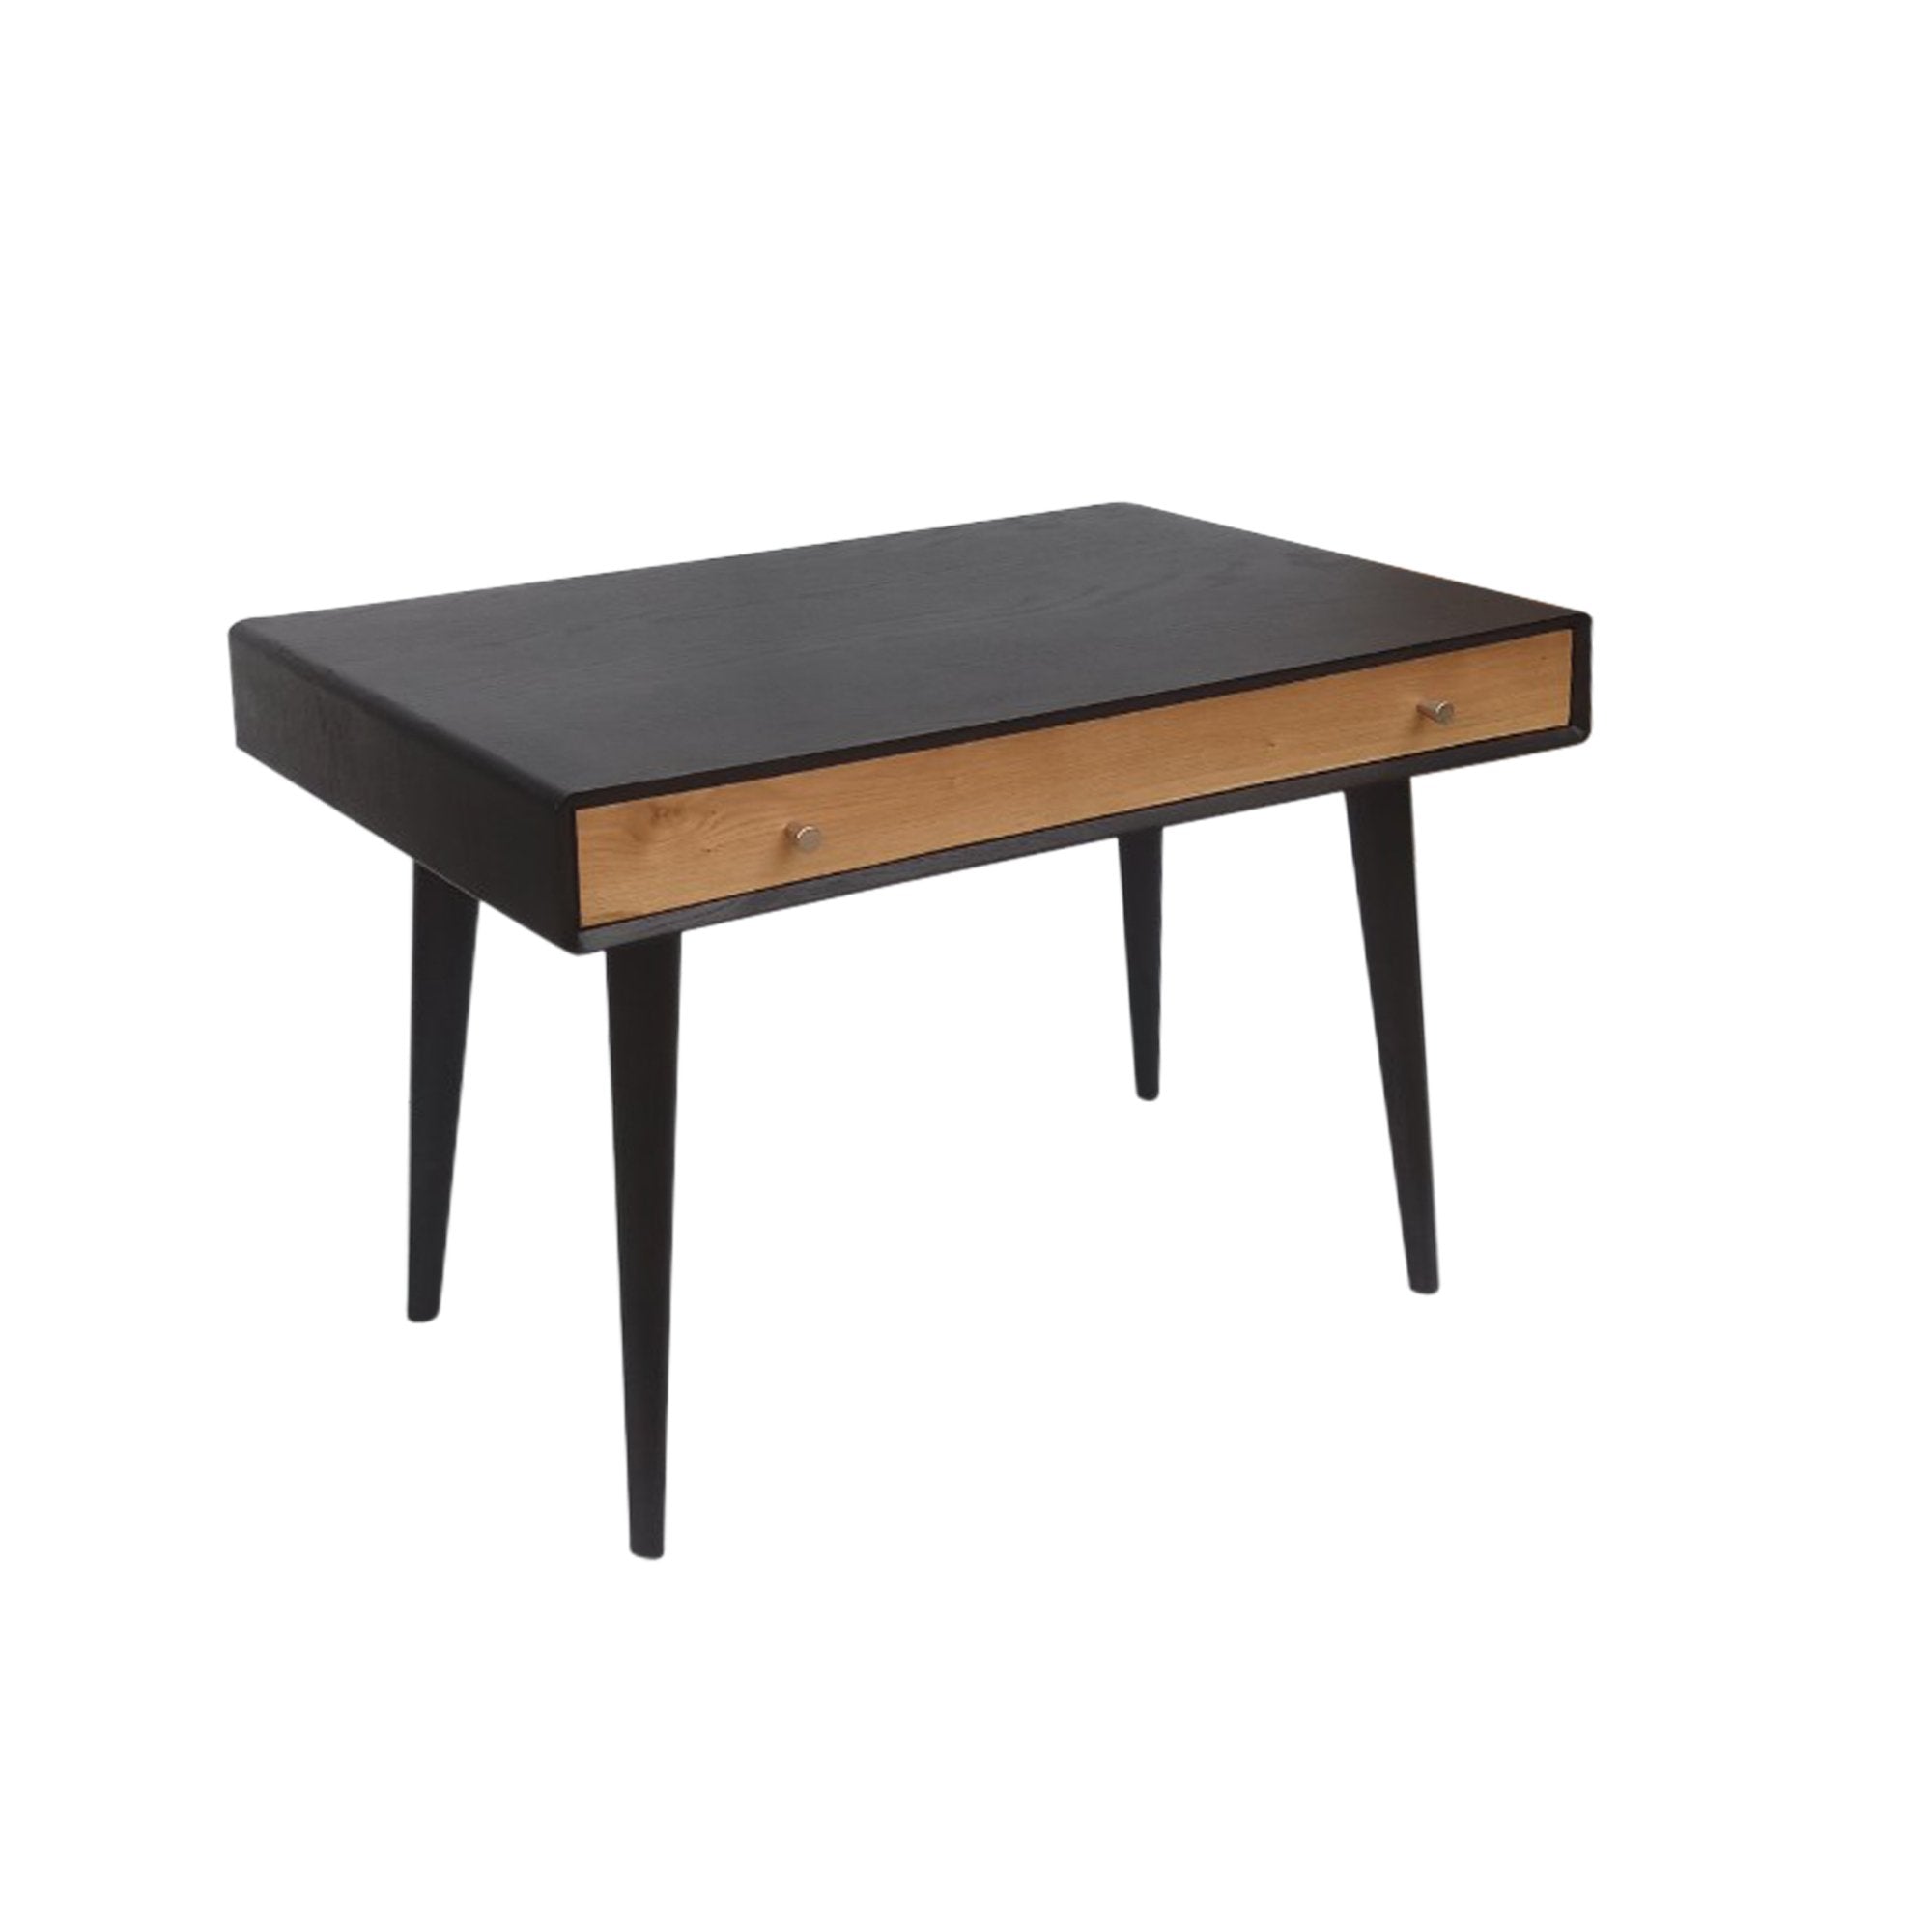 Twin Writing Study Office Wooden Desk 110cm - Black / Natural Fast shipping On sale